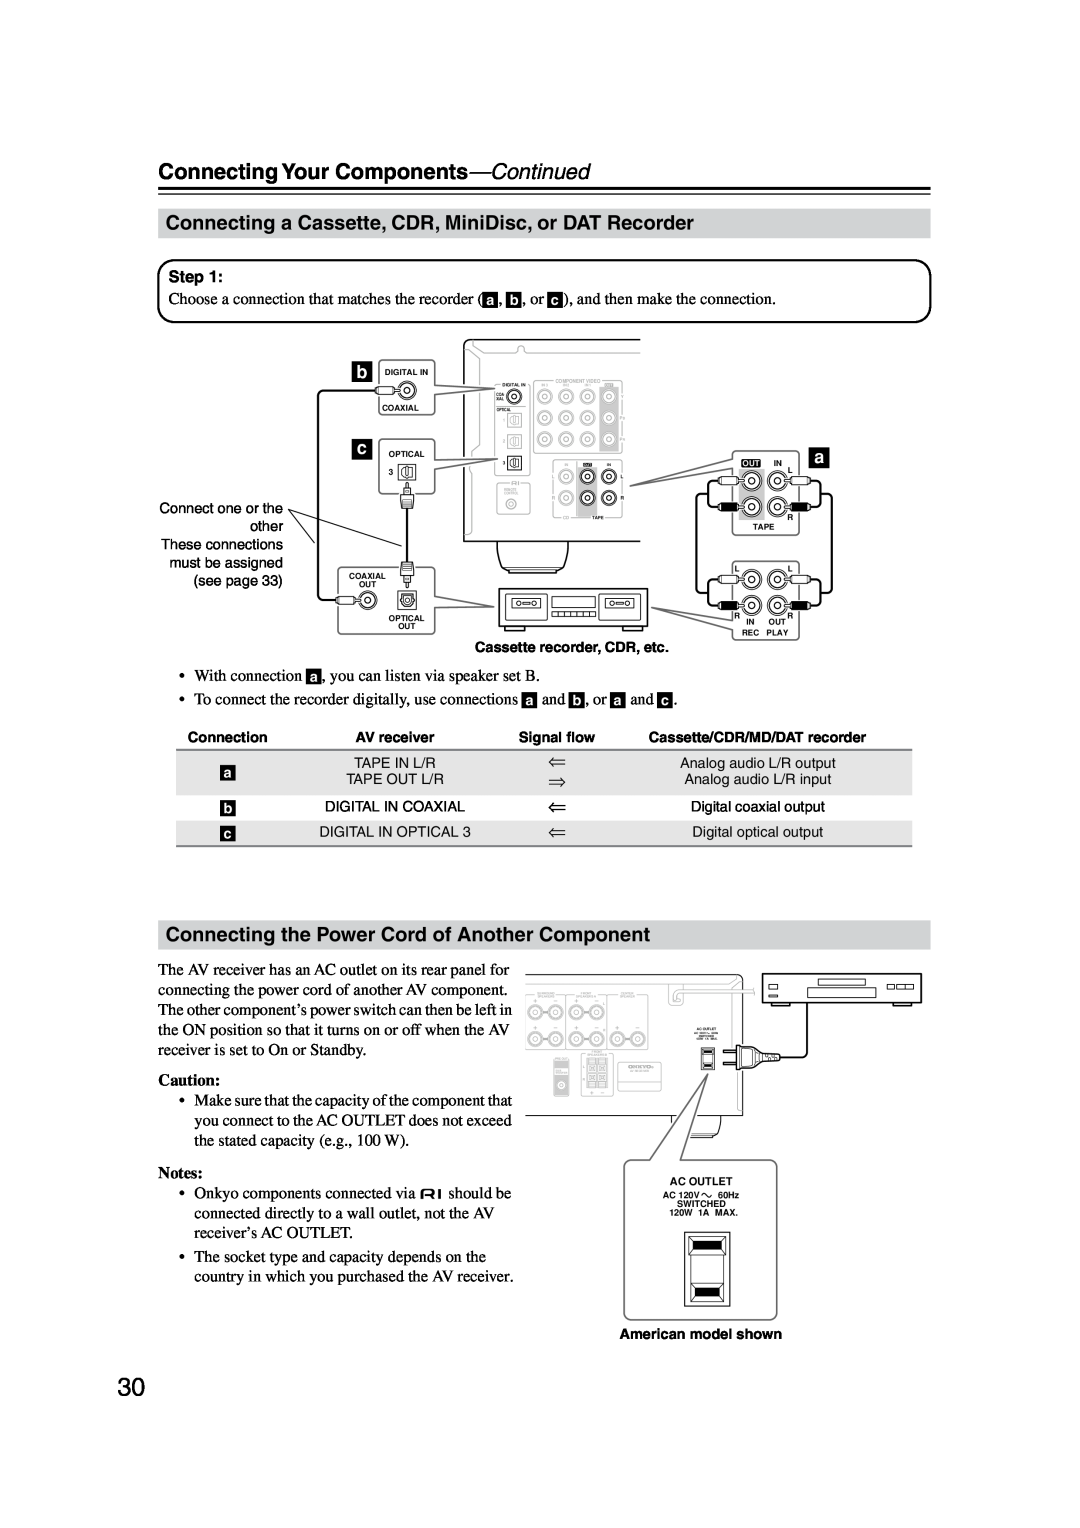 Onkyo TX-SR574 instruction manual Connecting the Power Cord of Another Component, Connecting Your Components-Continued 